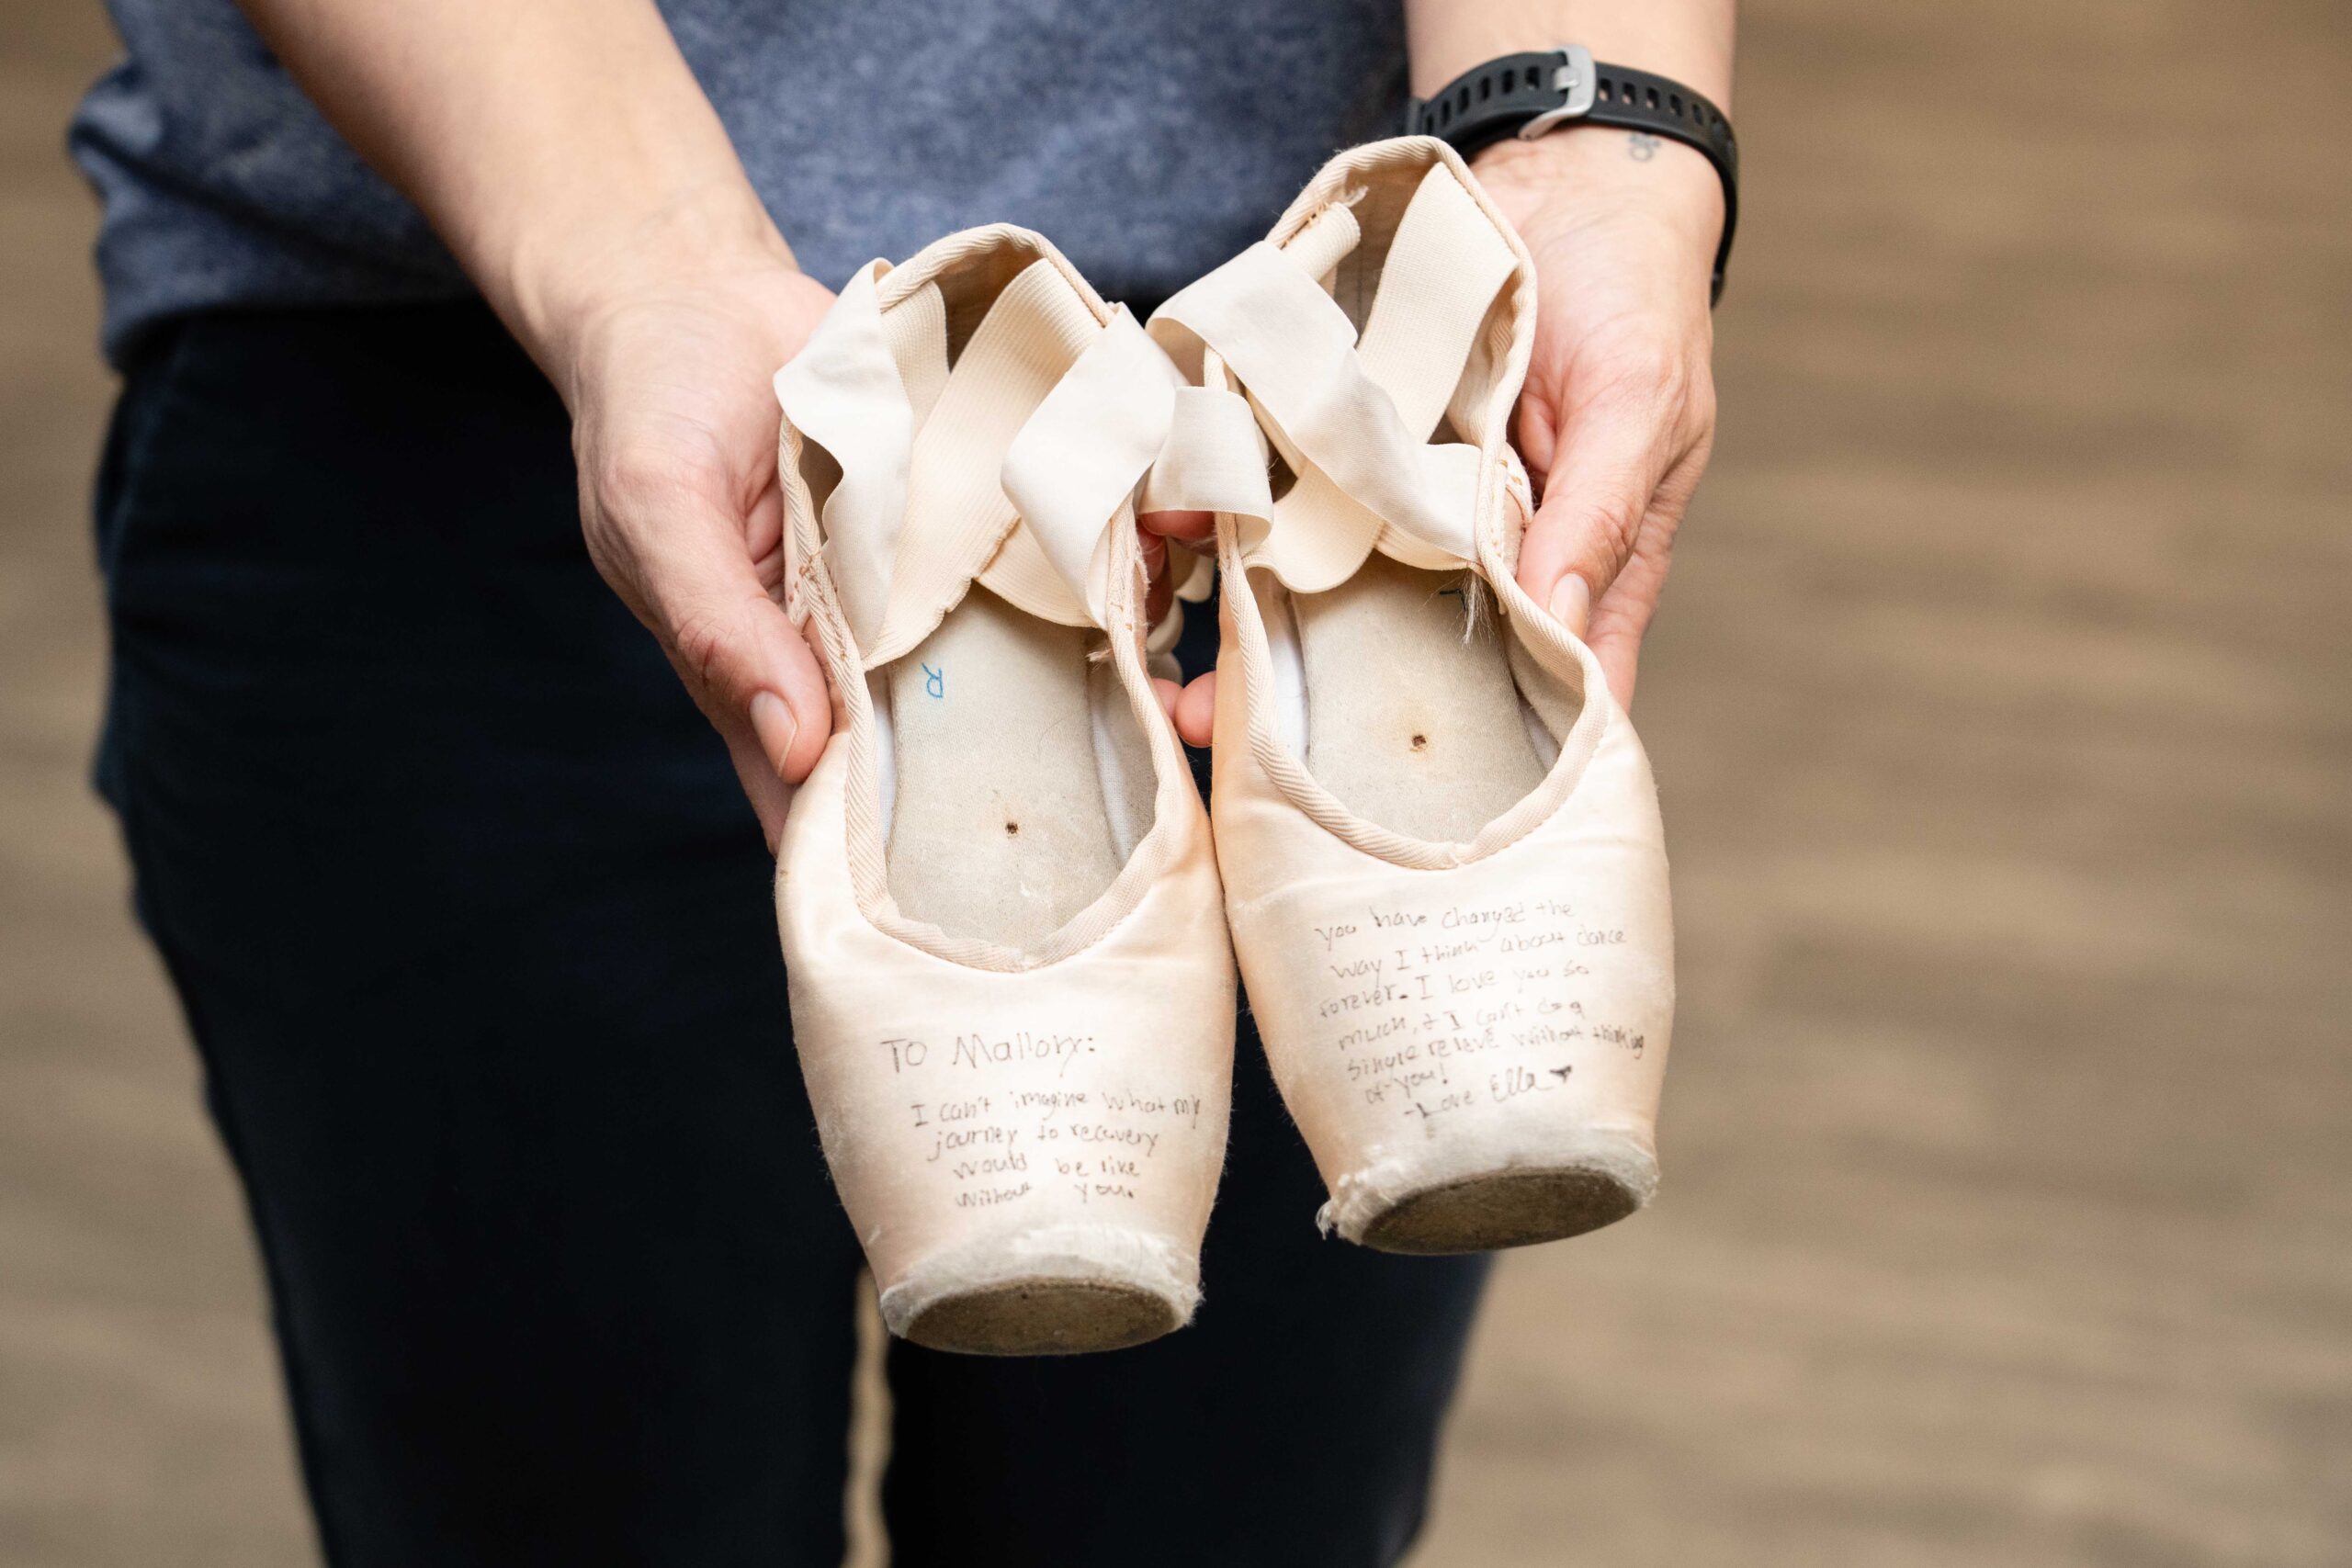 a pair of pink ballet dance shoes being held in Mallory Behenna's hands